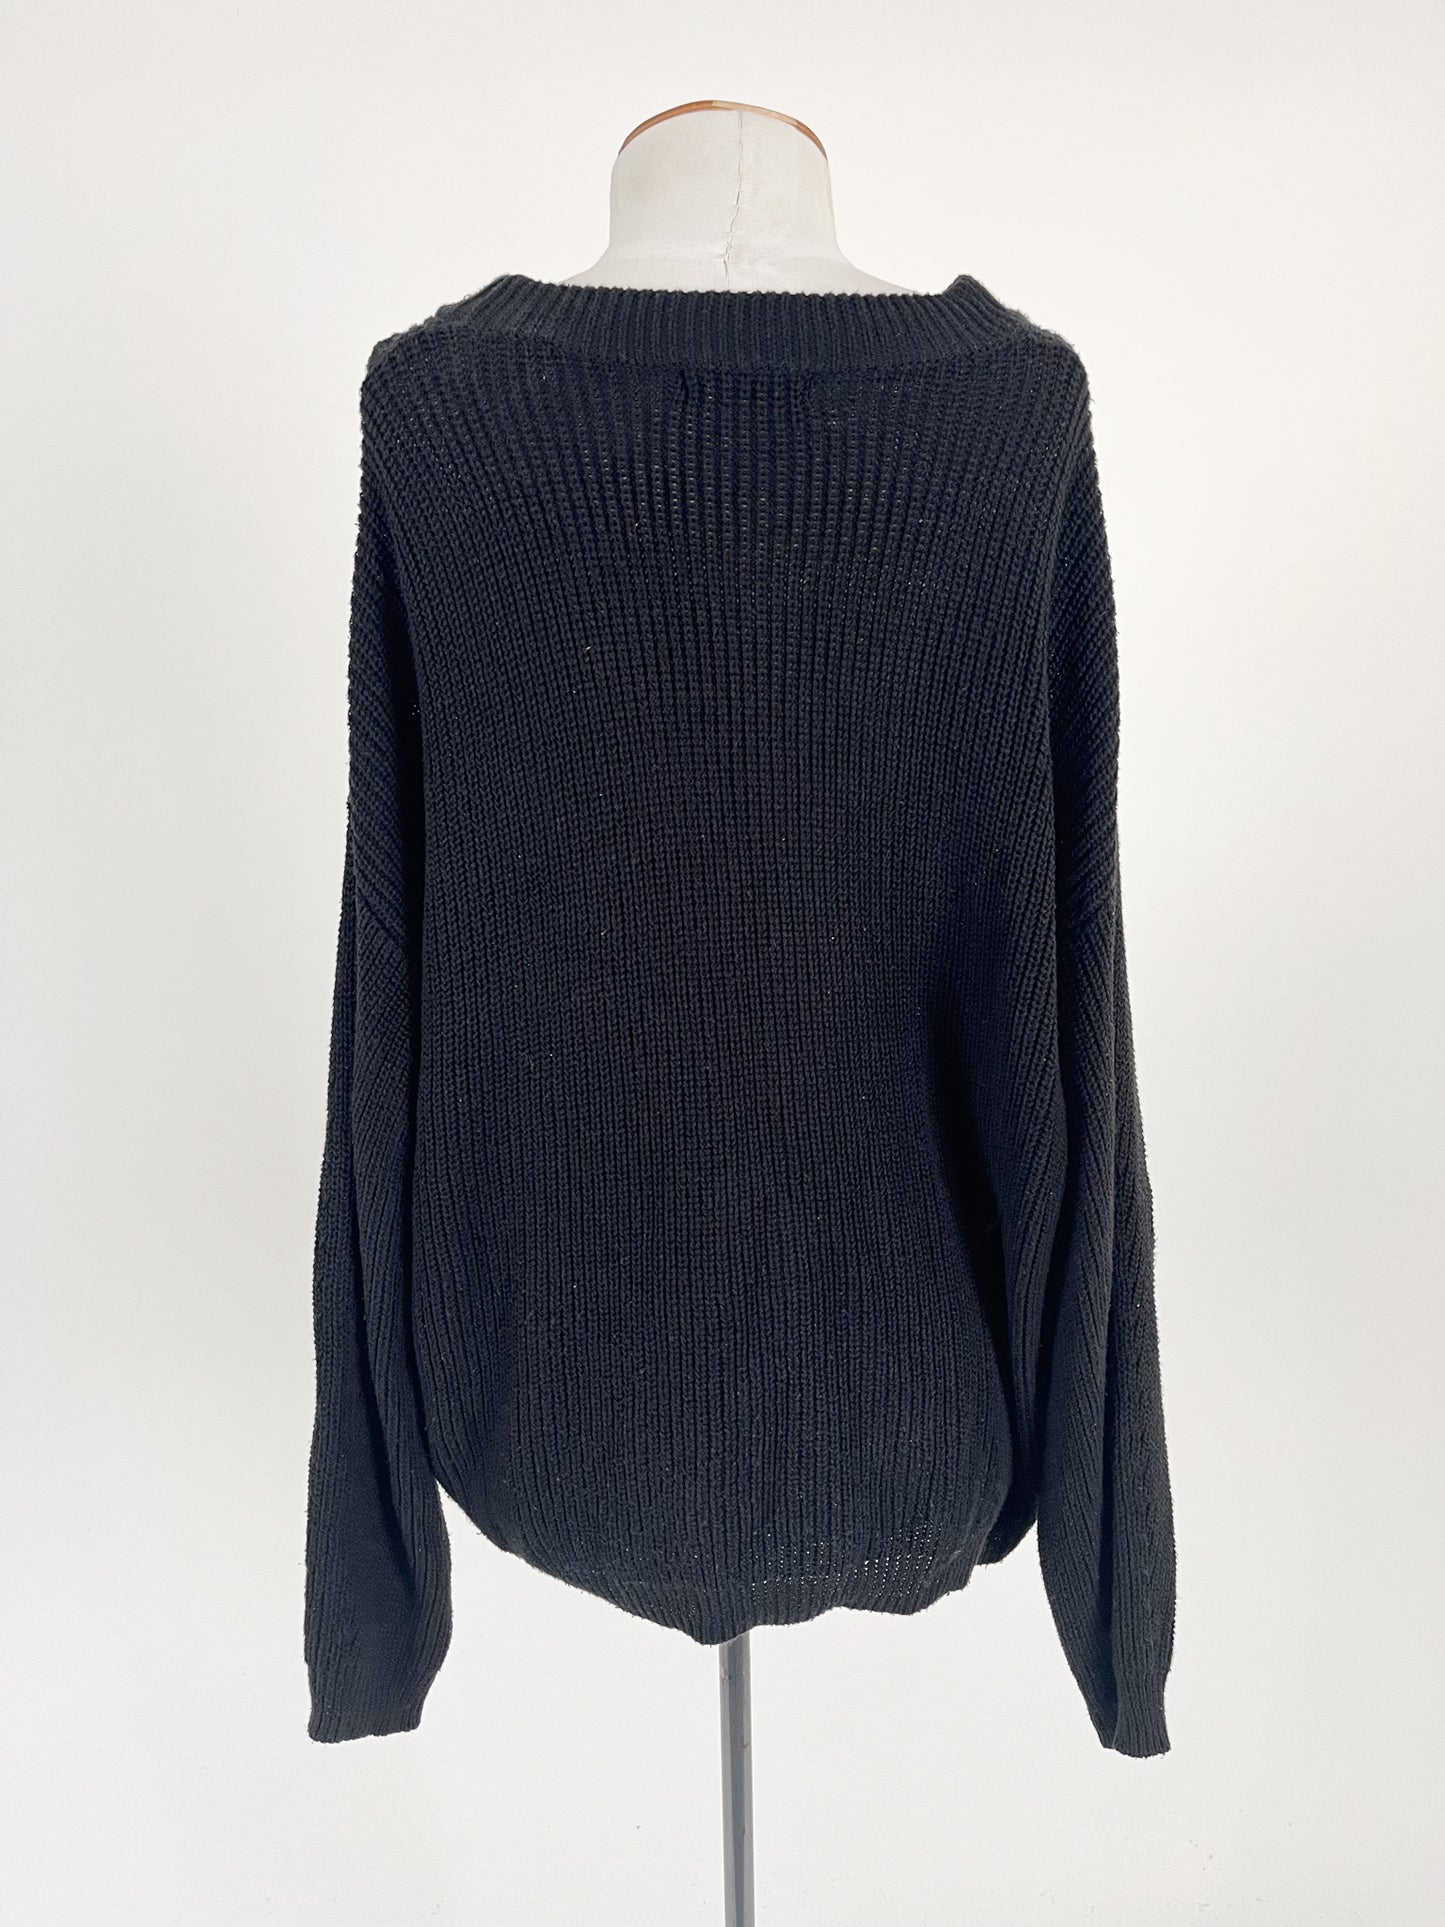 Glassons | Black Casual Jumper | Size S